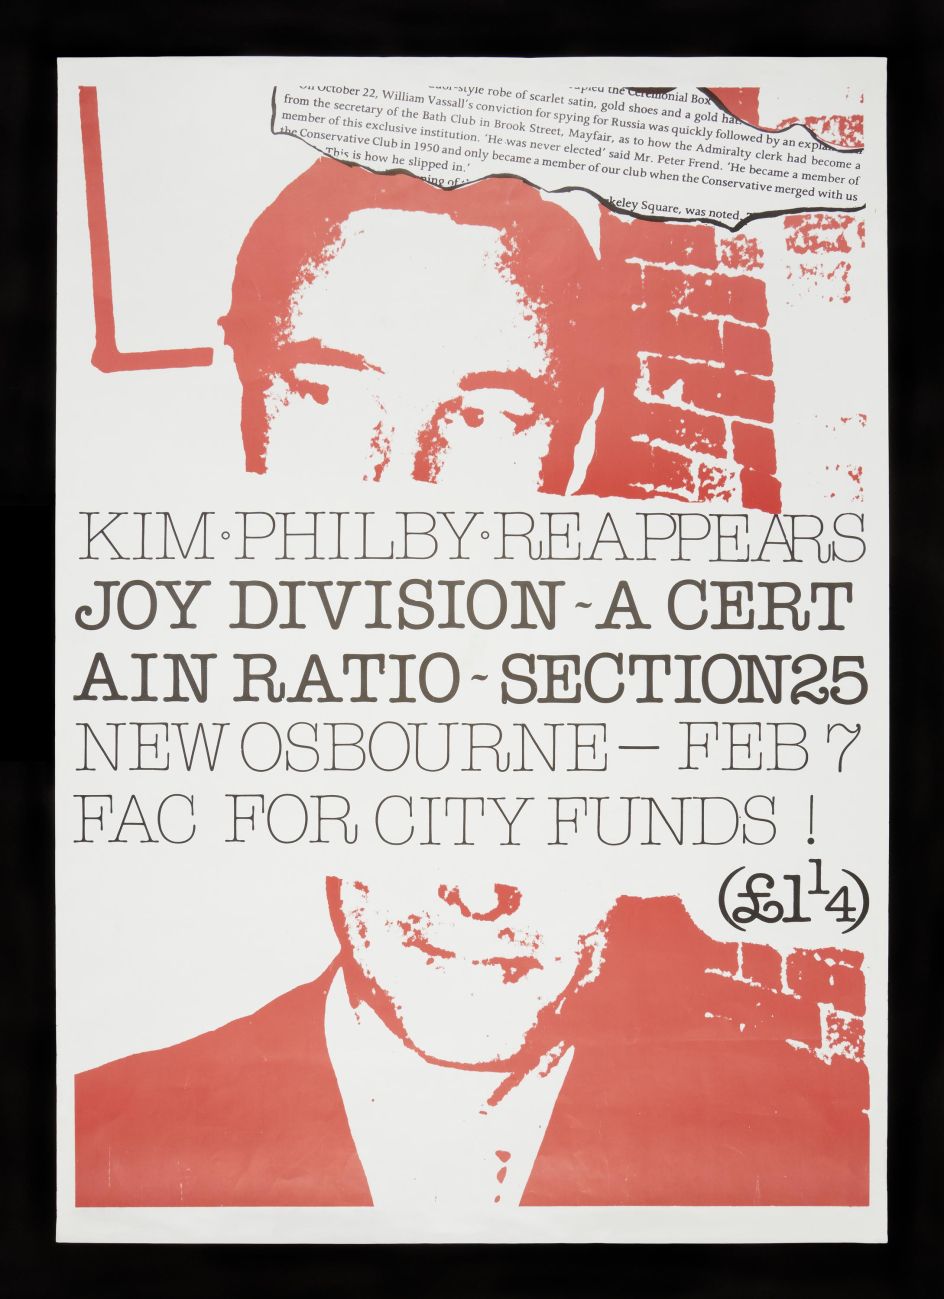 Poster designed by Jon Savage advertising Joy Division, A Certain Ratio and Section 25 for show at New Osbourne Club - Fac for City Funds © The Board of Trustees of the Science Museum